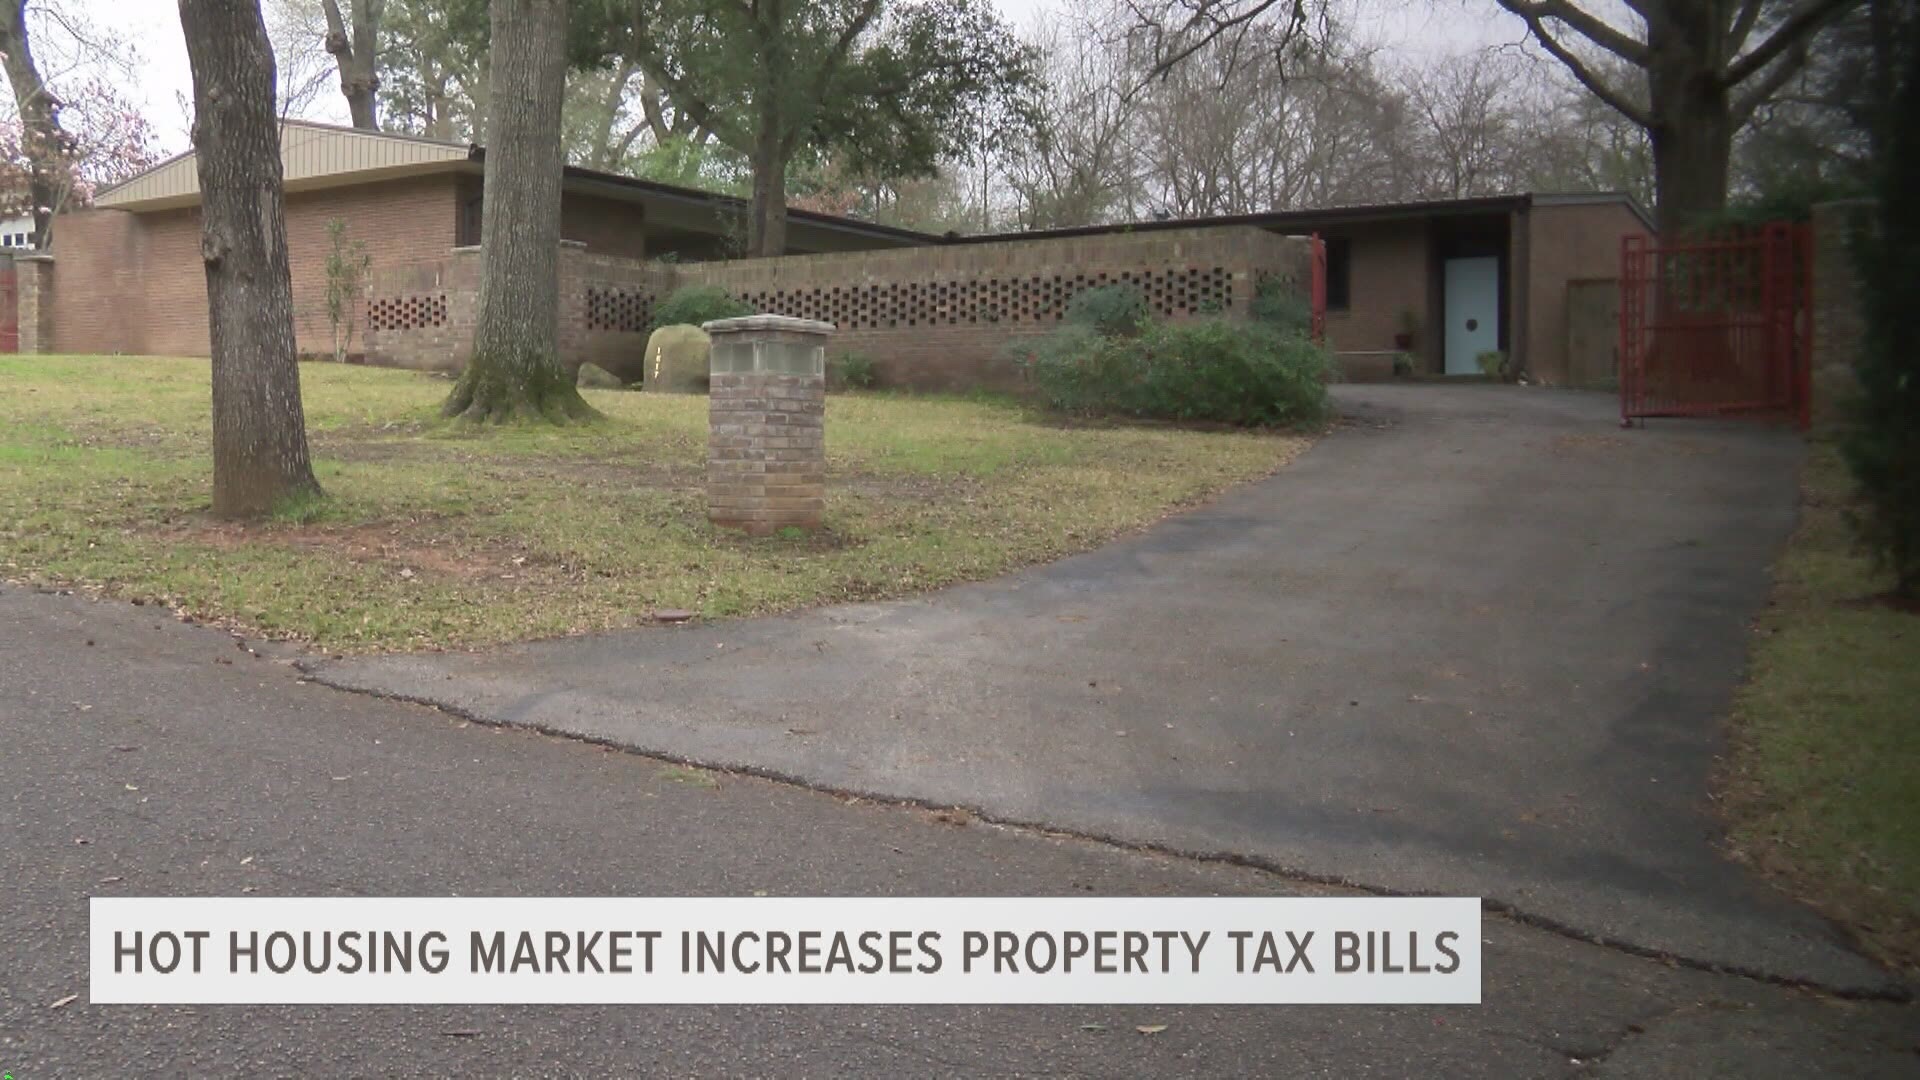 Most homeowners received appraisal notices showing their taxes would increase. Judge Moran explains why that might not be the case in Smith County.